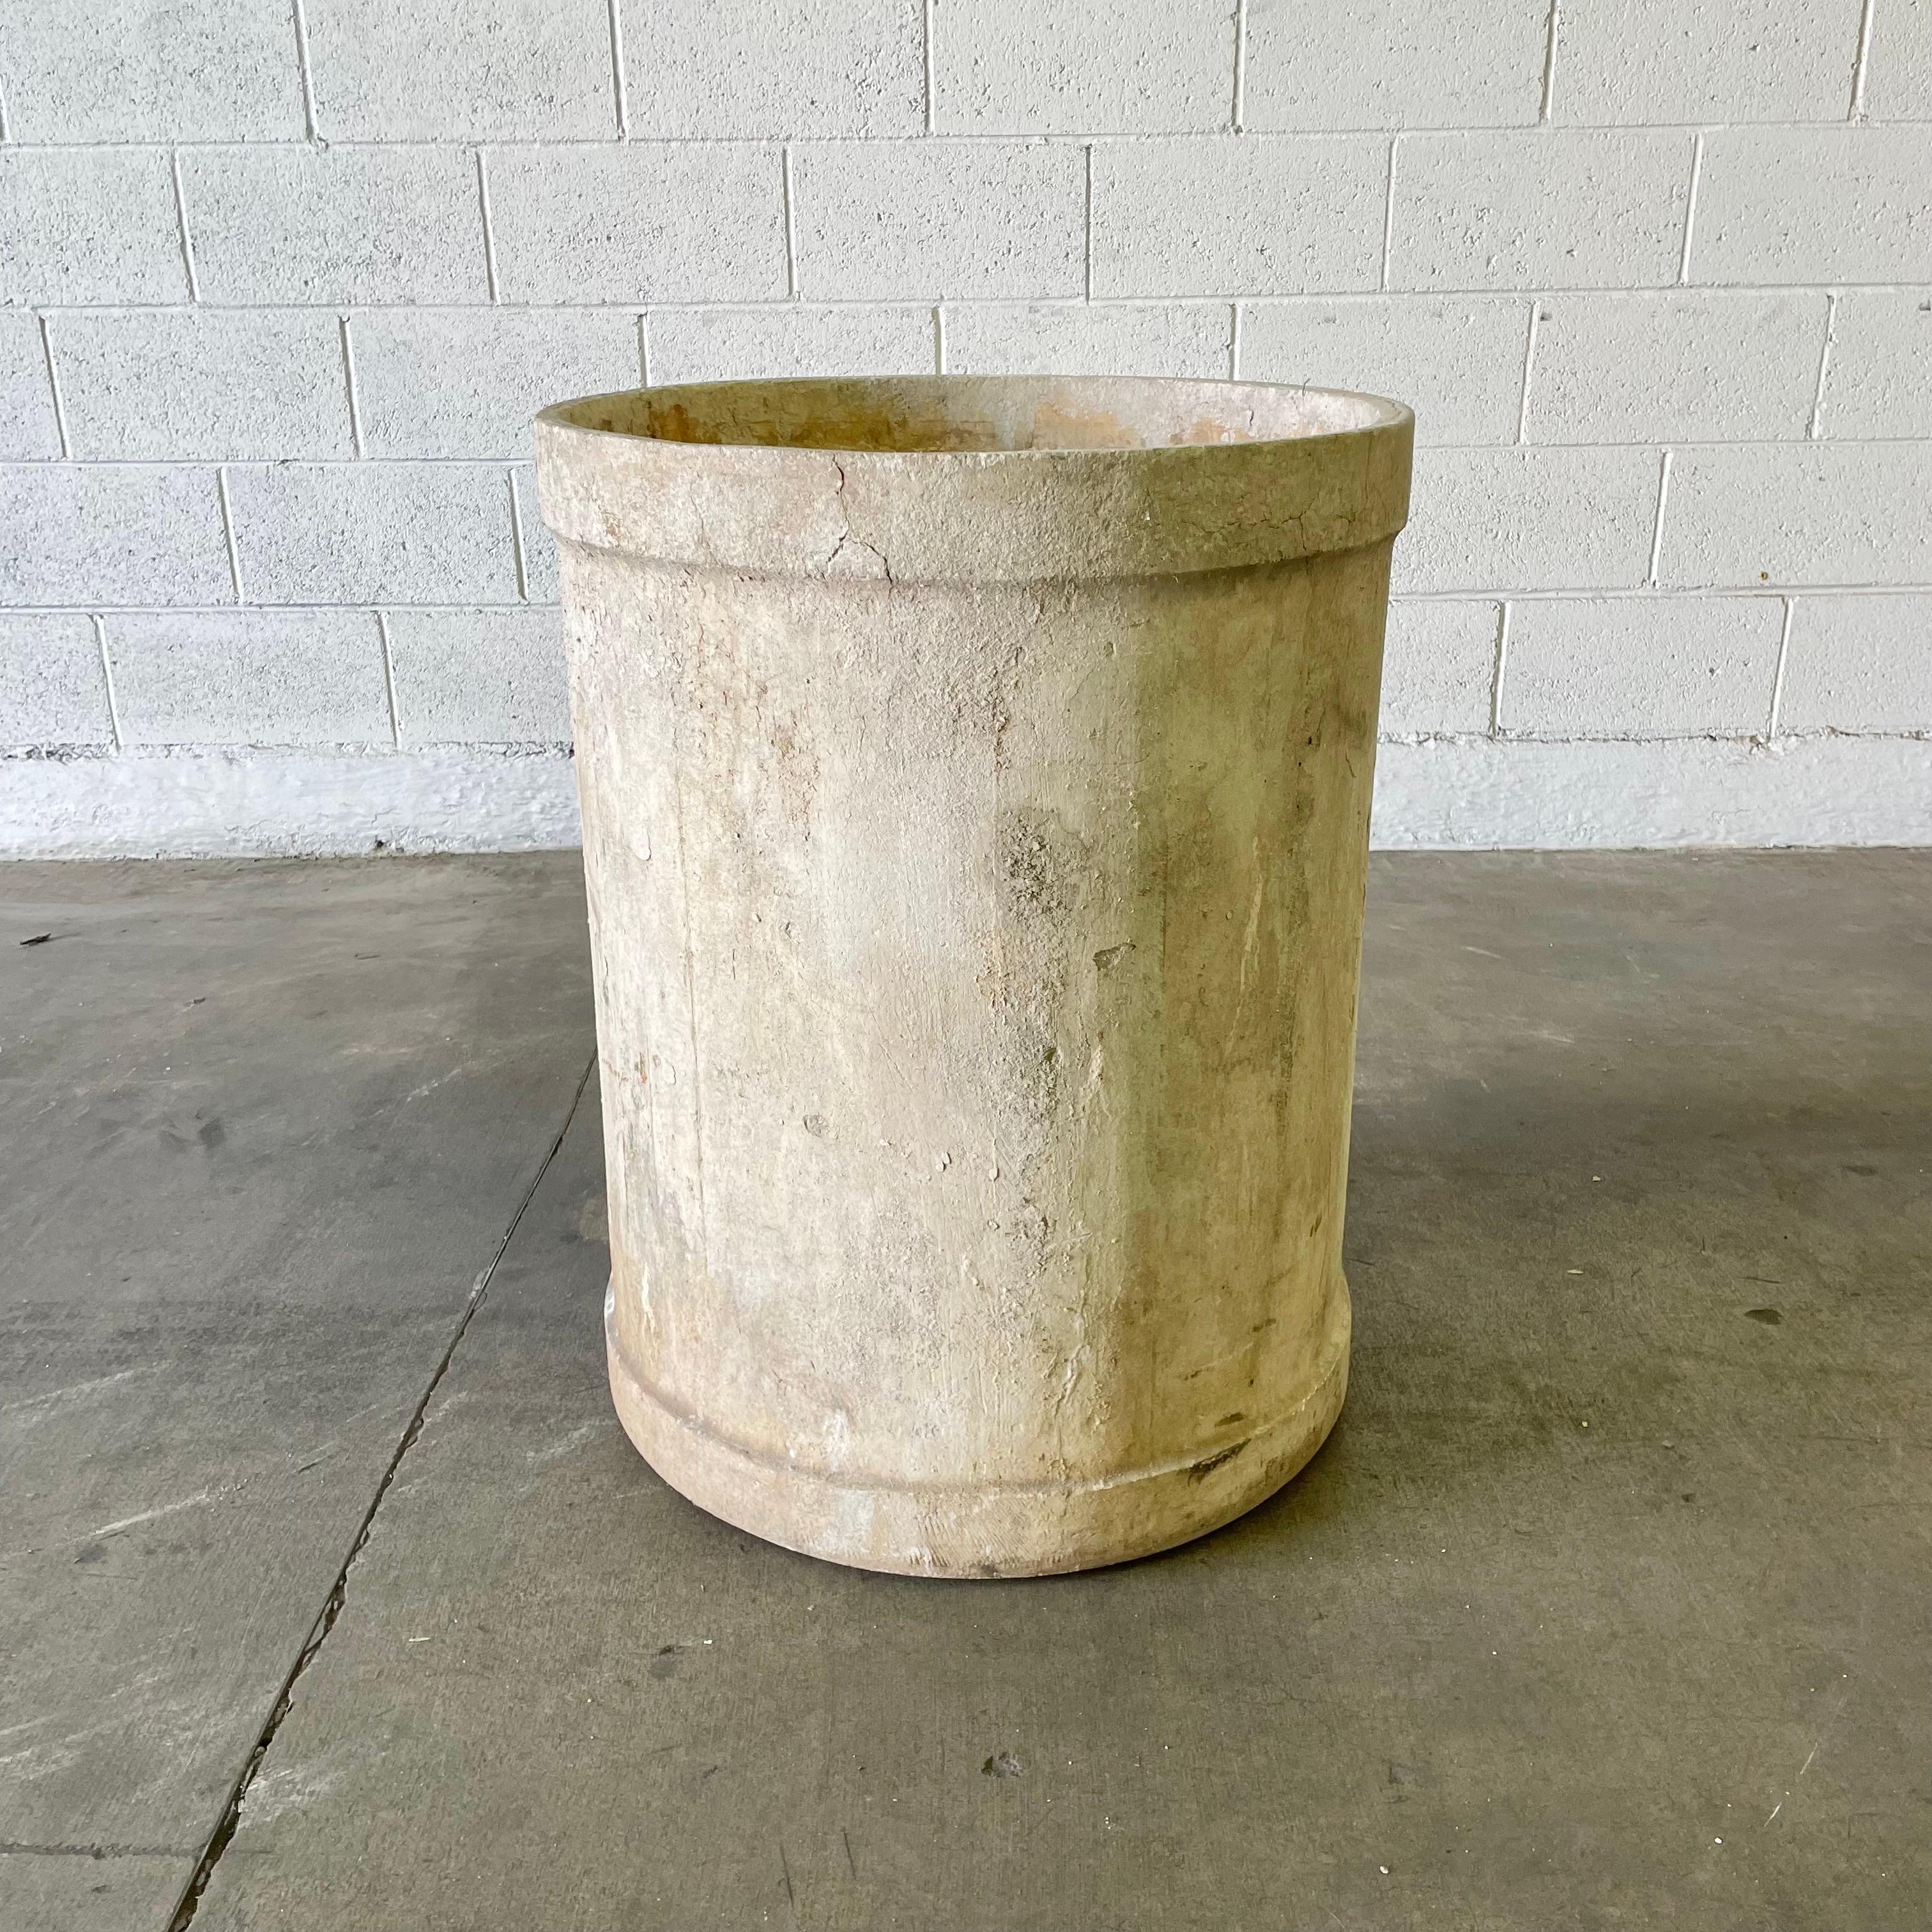 Rare monumental concrete tree planter by Willy Guhl. Cylindrical bin with lip. Extremely heavy and sturdy. This piece has a fantastic patina and texture. Substantial piece great for any back yard or patio. Only one available.

